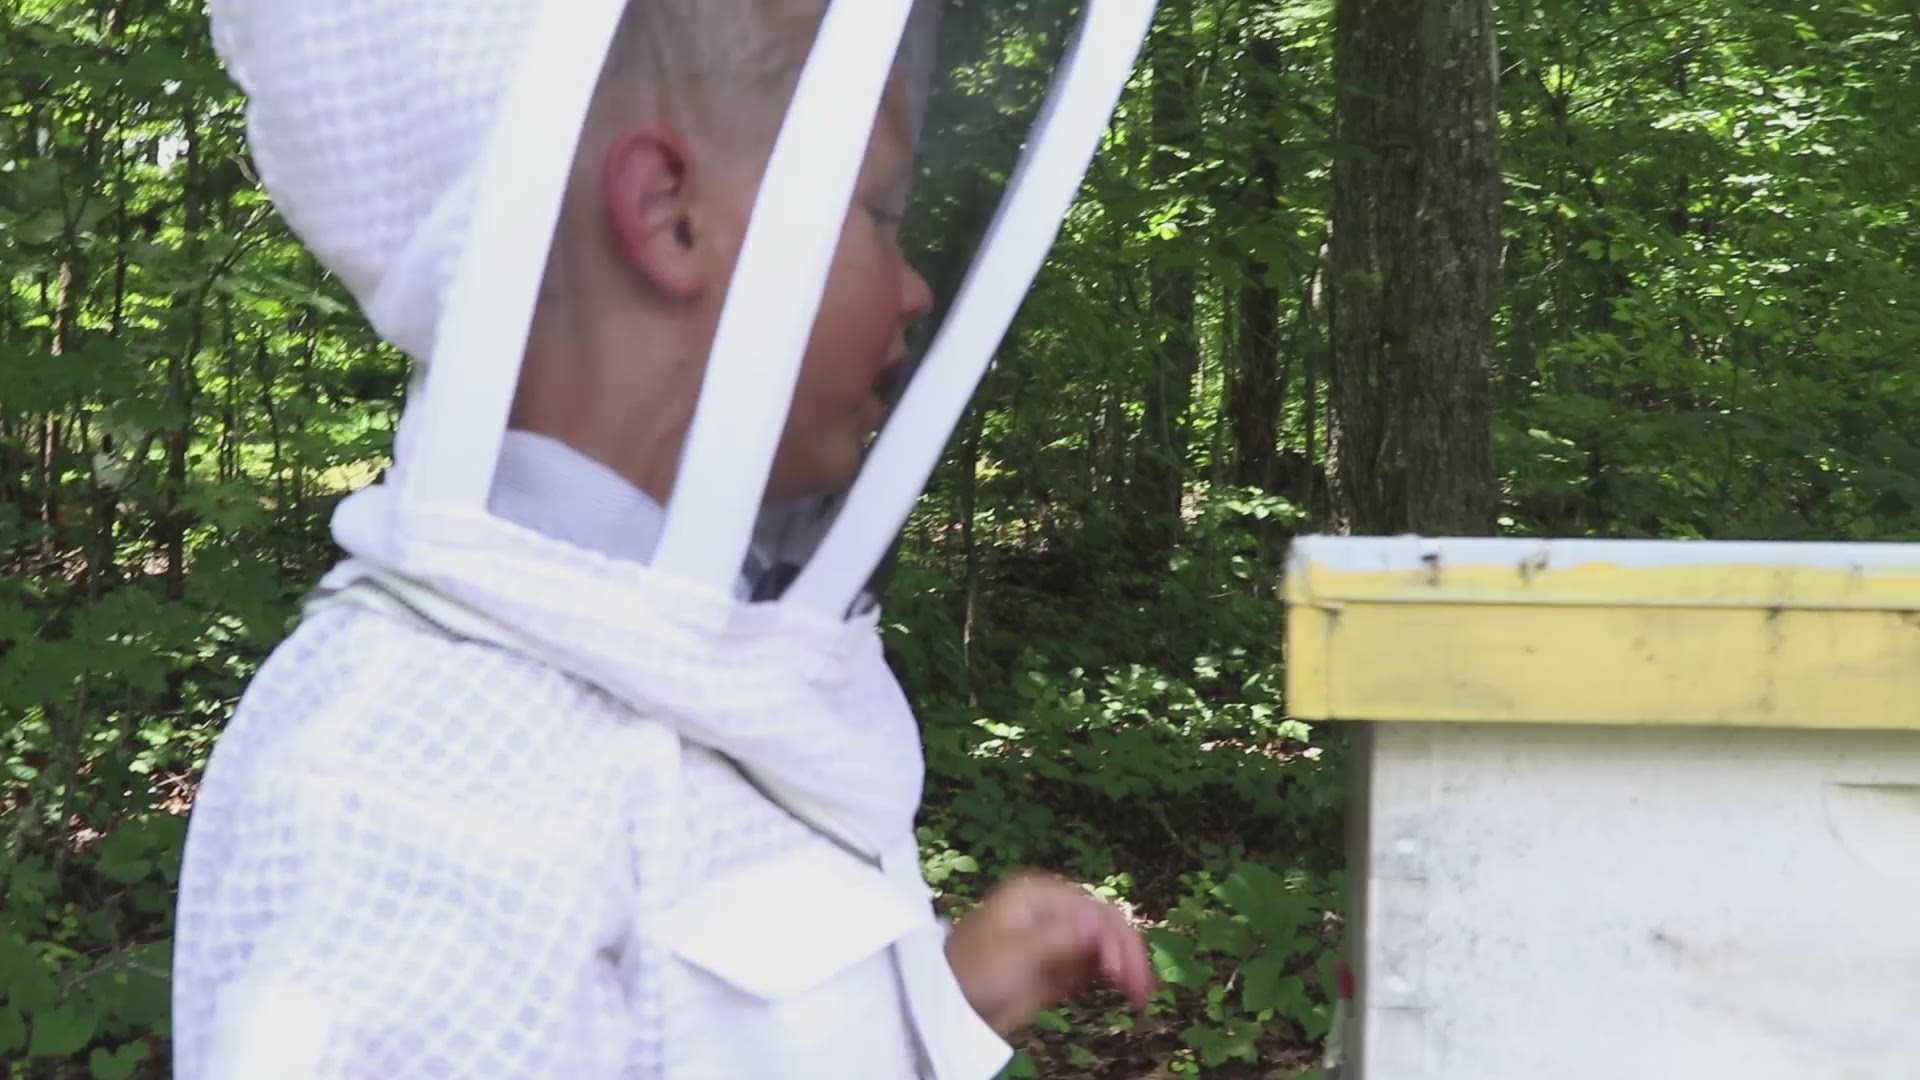 Five-year-old Hank Bergin gives 10News a tour through his family's beekeeping facilities.